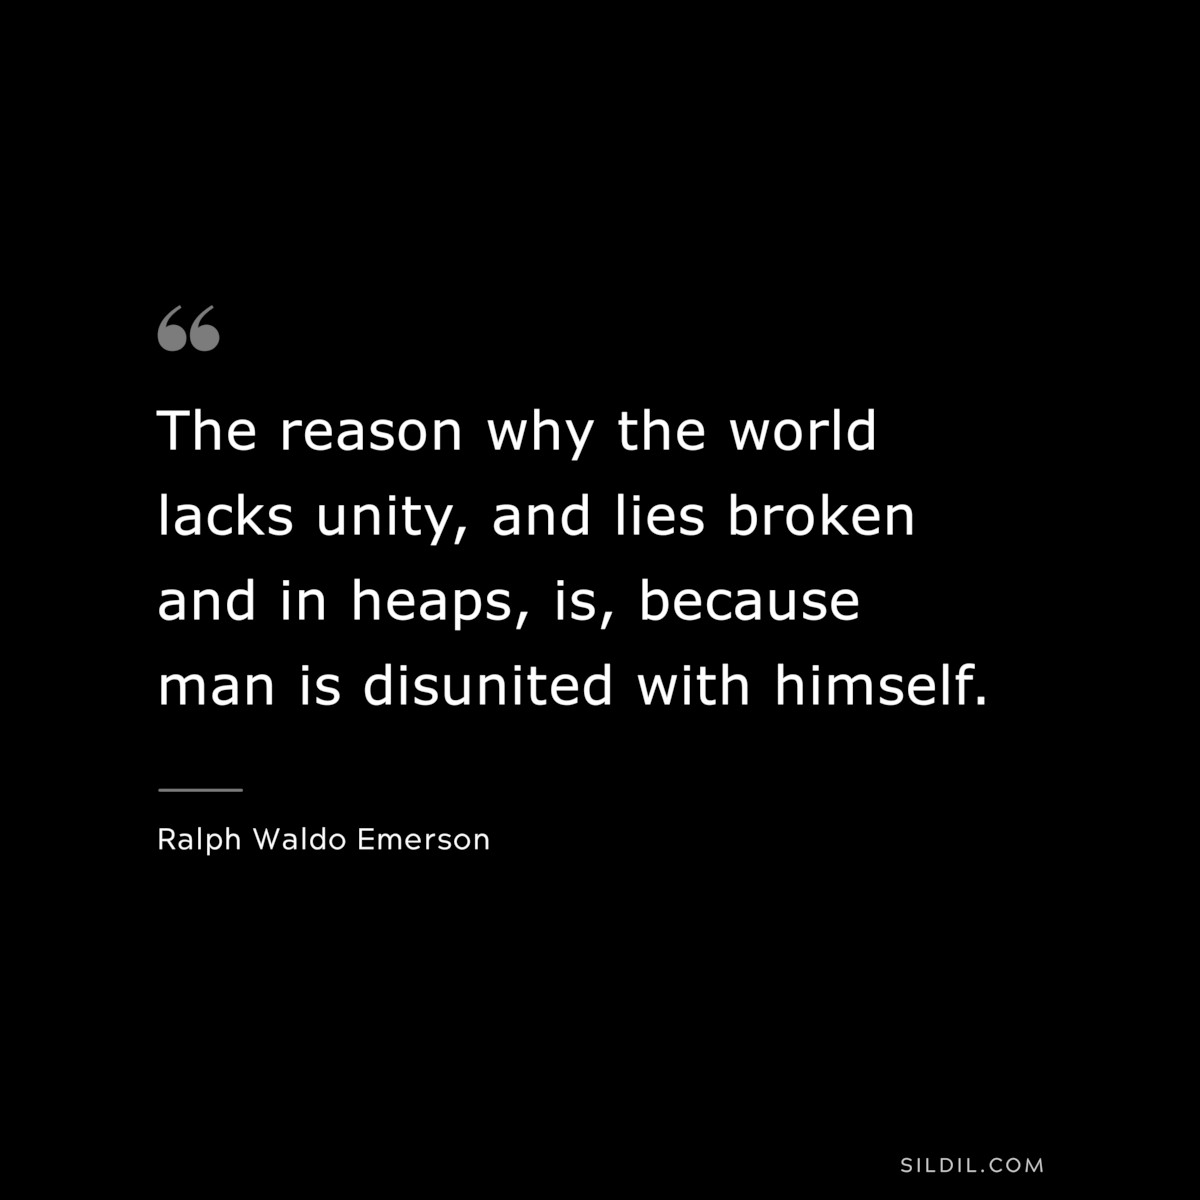 The reason why the world lacks unity, and lies broken and in heaps, is, because man is disunited with himself. — Ralph Waldo Emerson